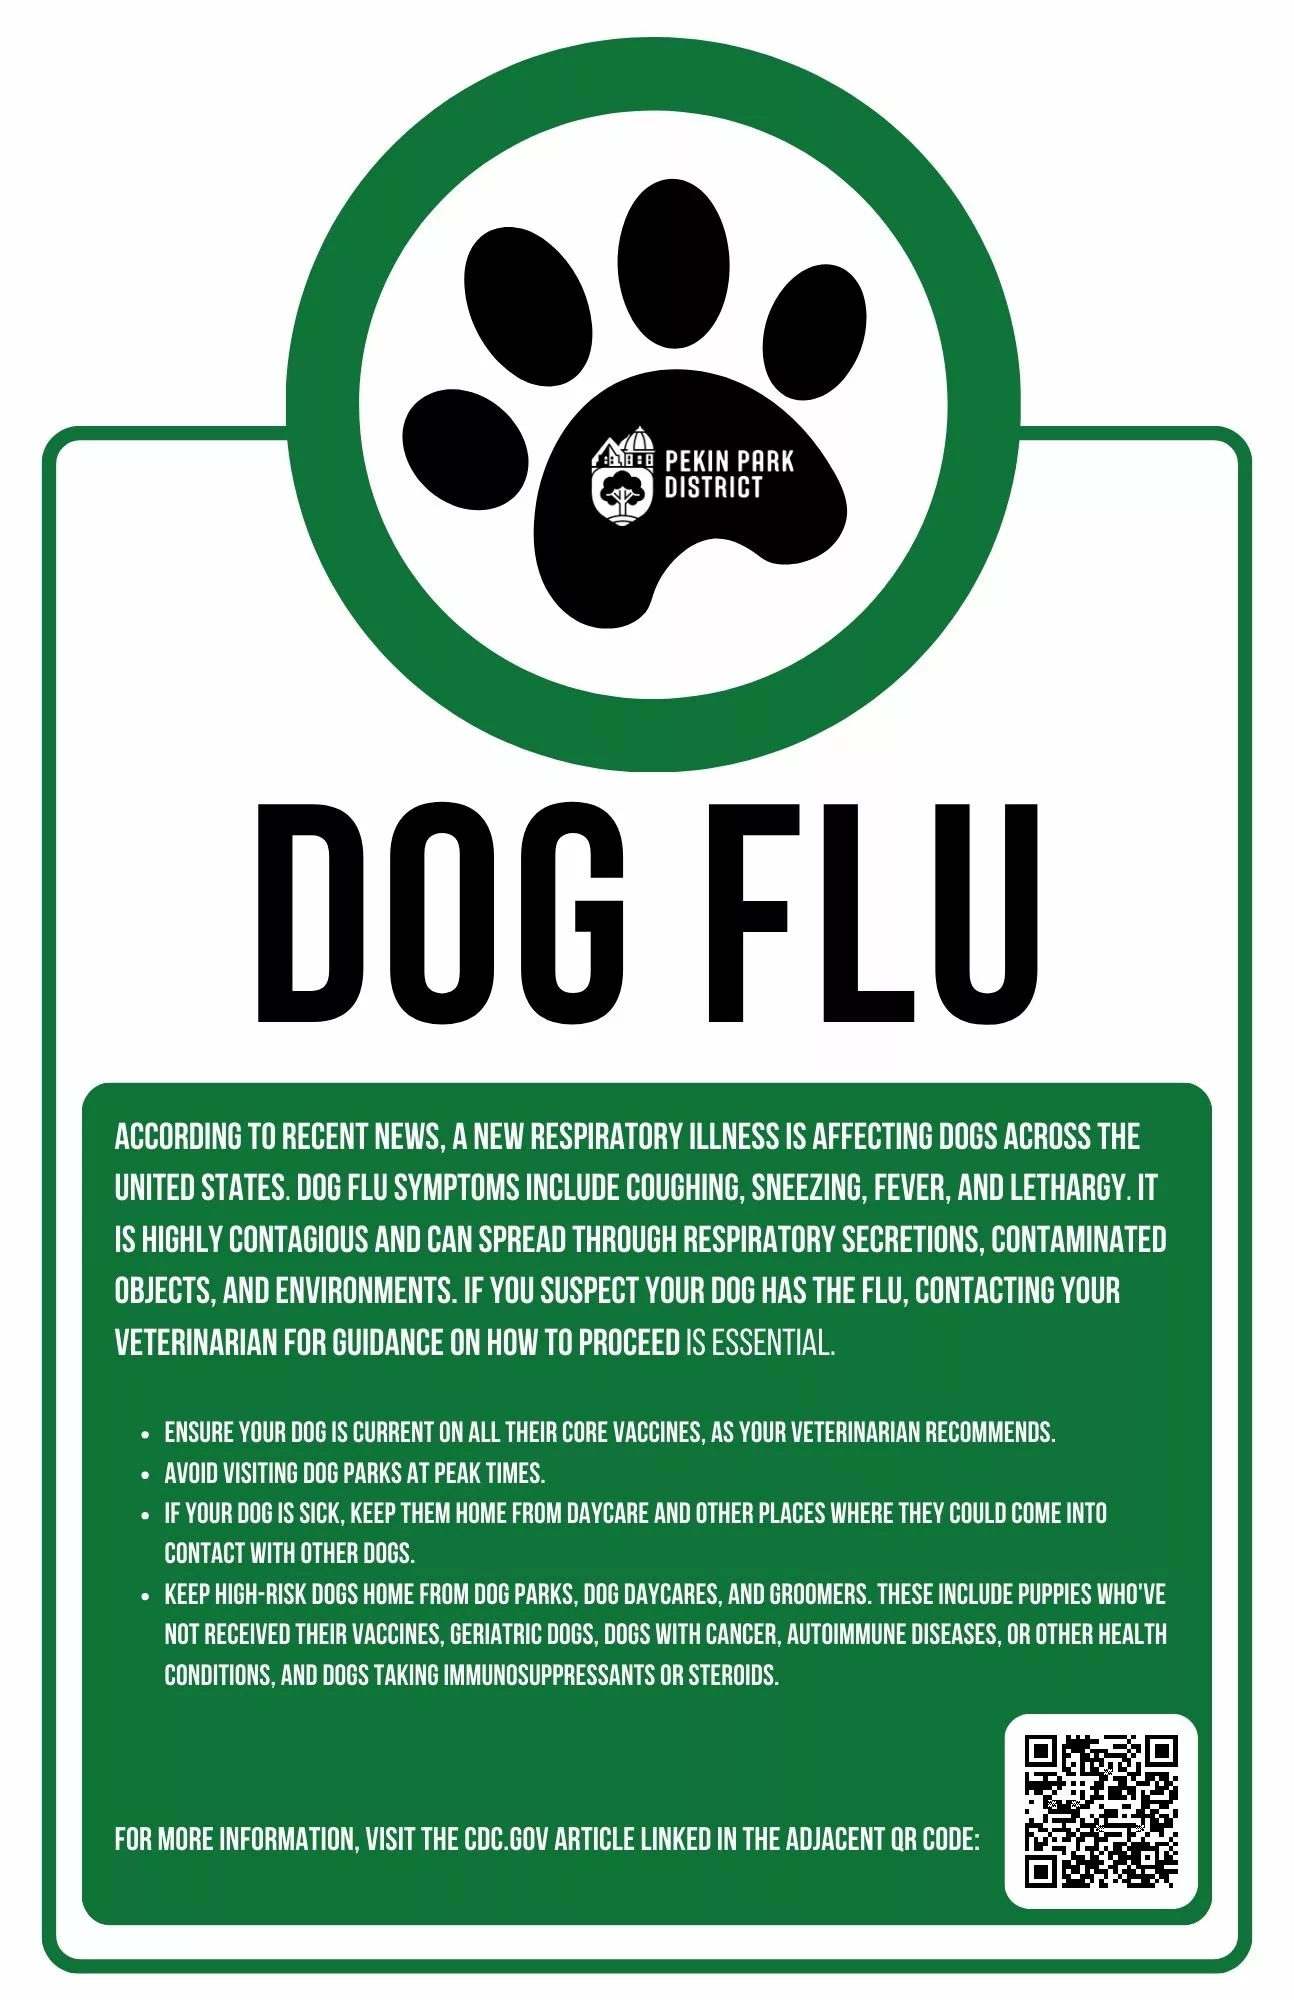 According to recent news, a new respiratory illness is affecting dogs across the United States. Dog flu symptoms include coughing, sneezing, fever, and lethargy. It is highly contagious and can spread through respiratory secretions, contaminated objects, and environments. If you suspect your dog has the flu, contacting your veterinarian for guidance on how to proceed is essential. Ensure your dog is current on all their core vaccines, as your veterinarian recommends. Avoid visiting dog parks at peak times. If your dog is sick, keep them home from daycare and other places where they could come into contact with other dogs. Keep high-risk dogs home from dog parks, dog daycares, and groomers. These include puppies who've not received their vaccines, geriatric dogs, dogs with CANCER, autoimmune diseases, or other health conditions, and dogs taking immunosuppressants OR steroids. For more information, visit the CDC.GOV article linked below. 